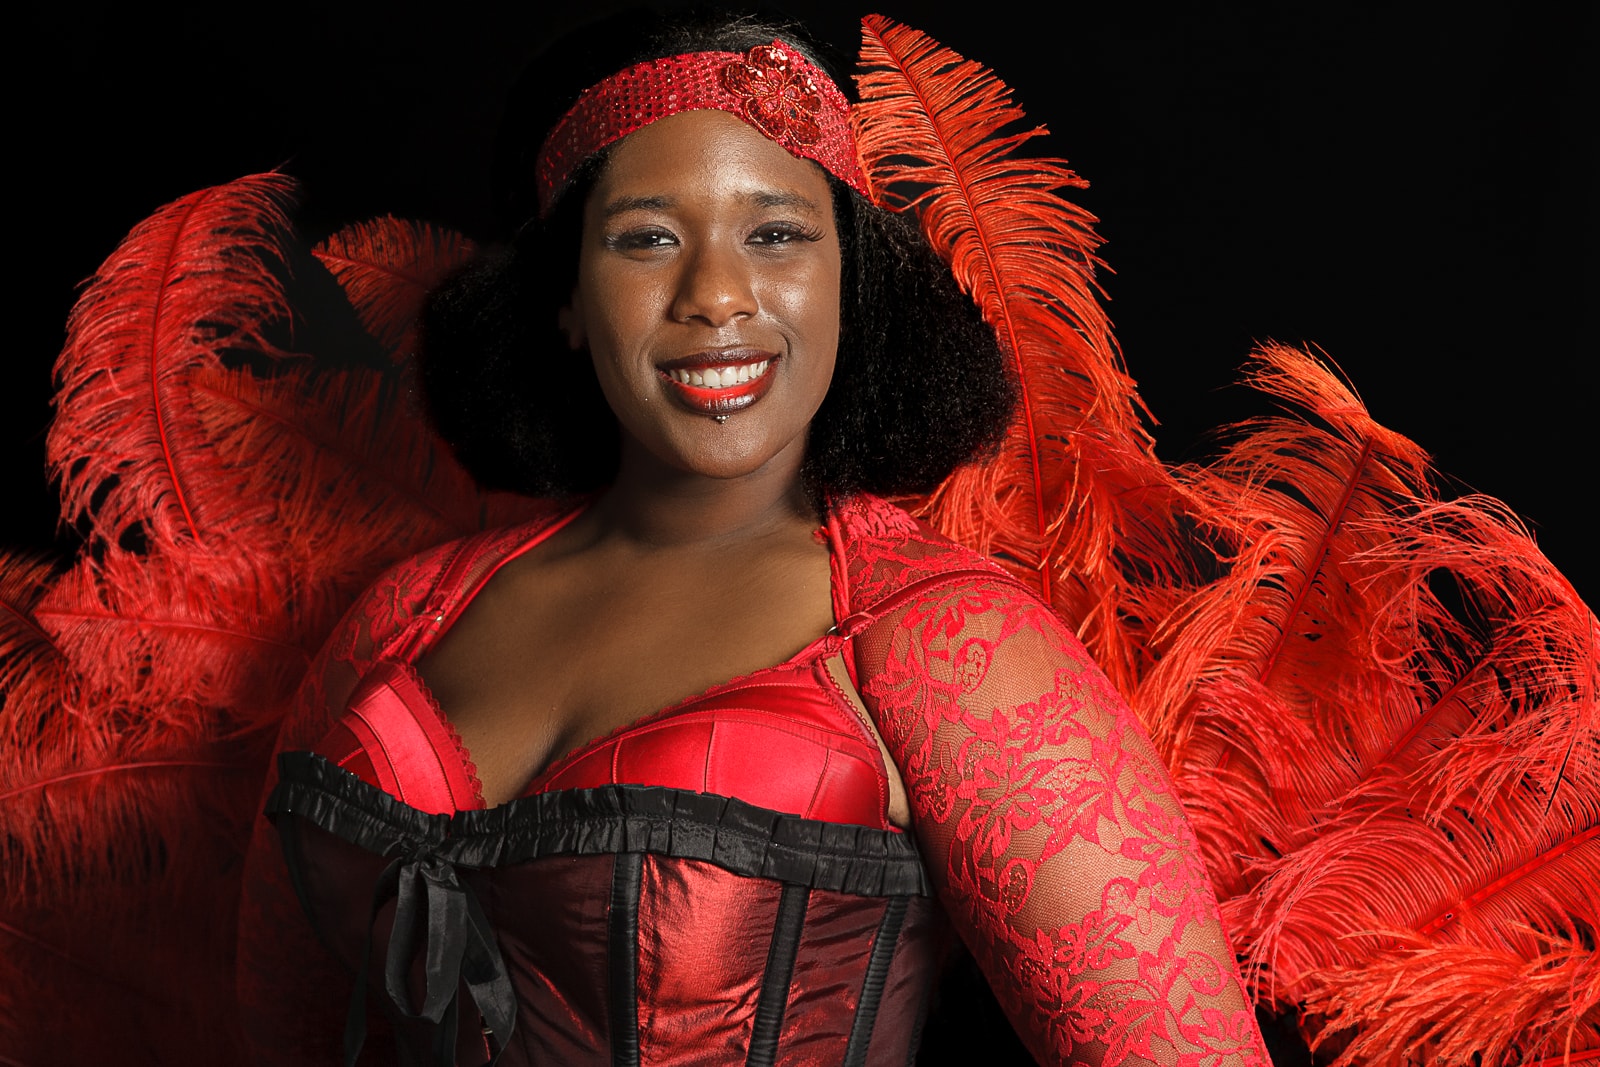 social media portrait of burlesque entertainer woman of colour in bright red outfit